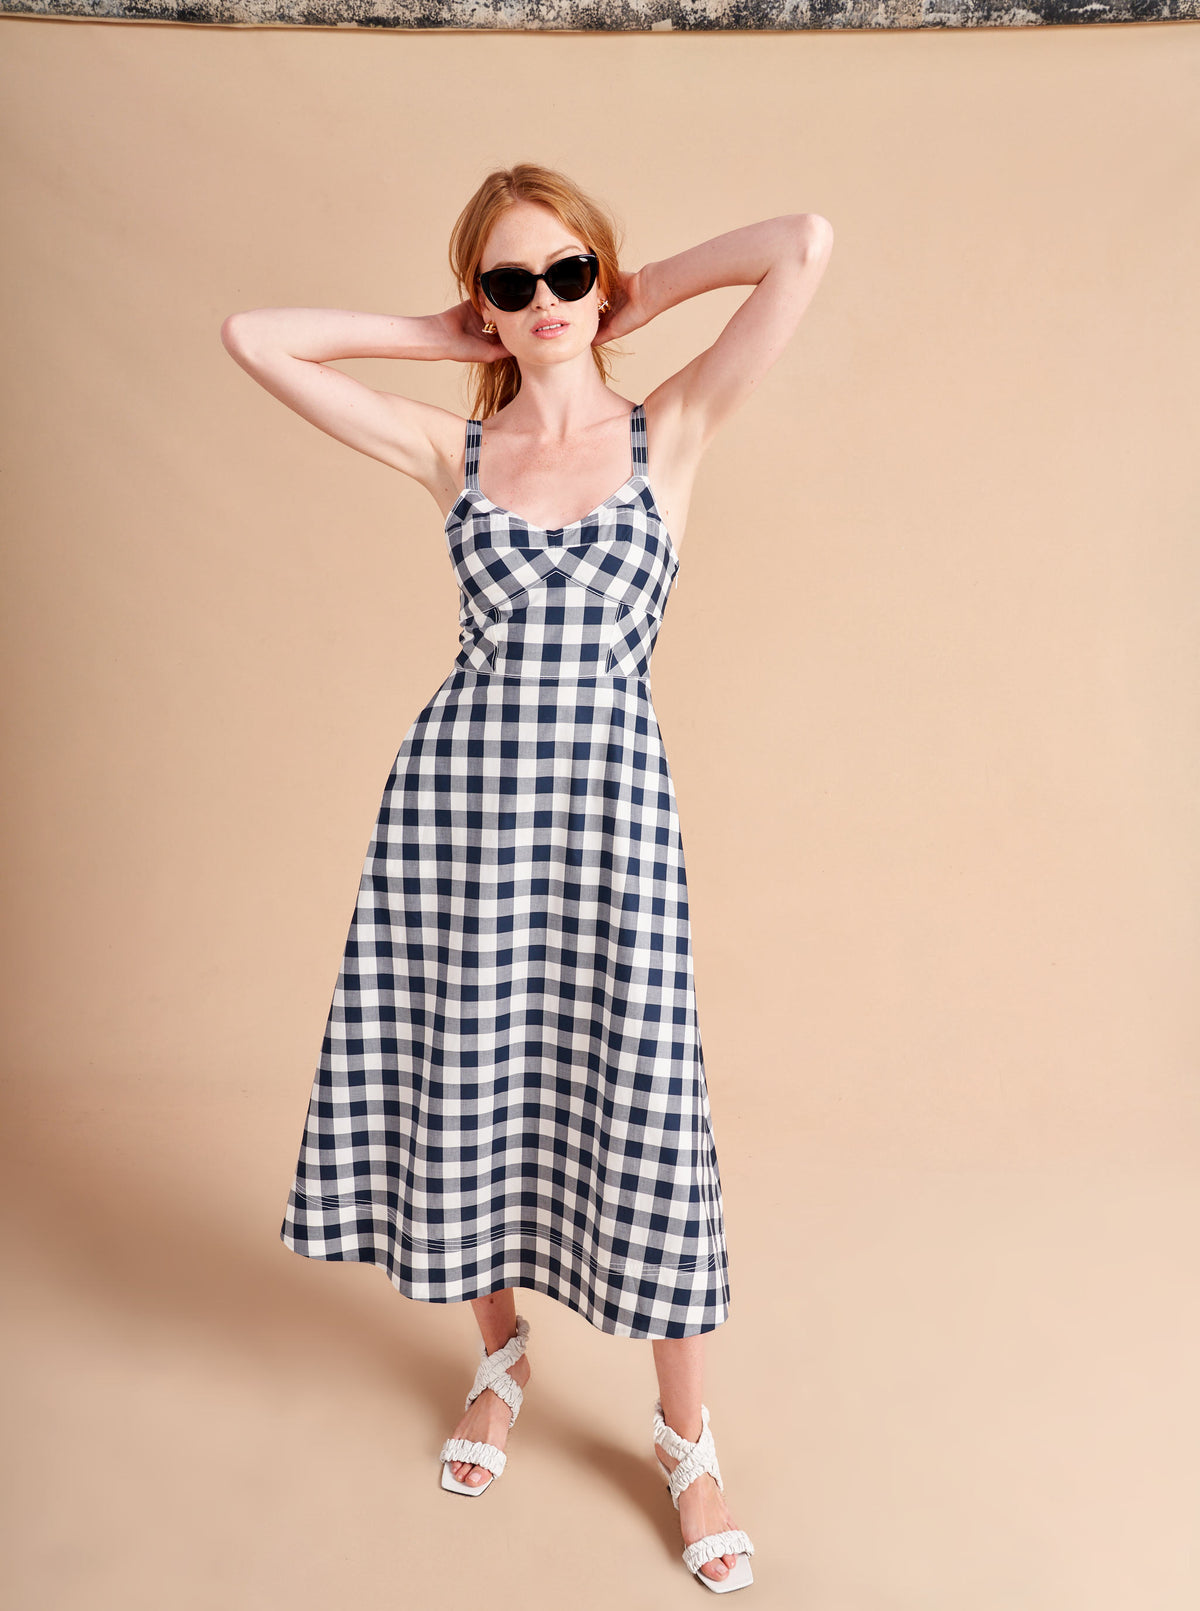 Retro meets modern in our stretch cotton, navy and white gingham, Fiona Dress with under bust seaming and full skirt. The smocked back panel ensures the perfect fit in this fit and flare must-have summer essential.